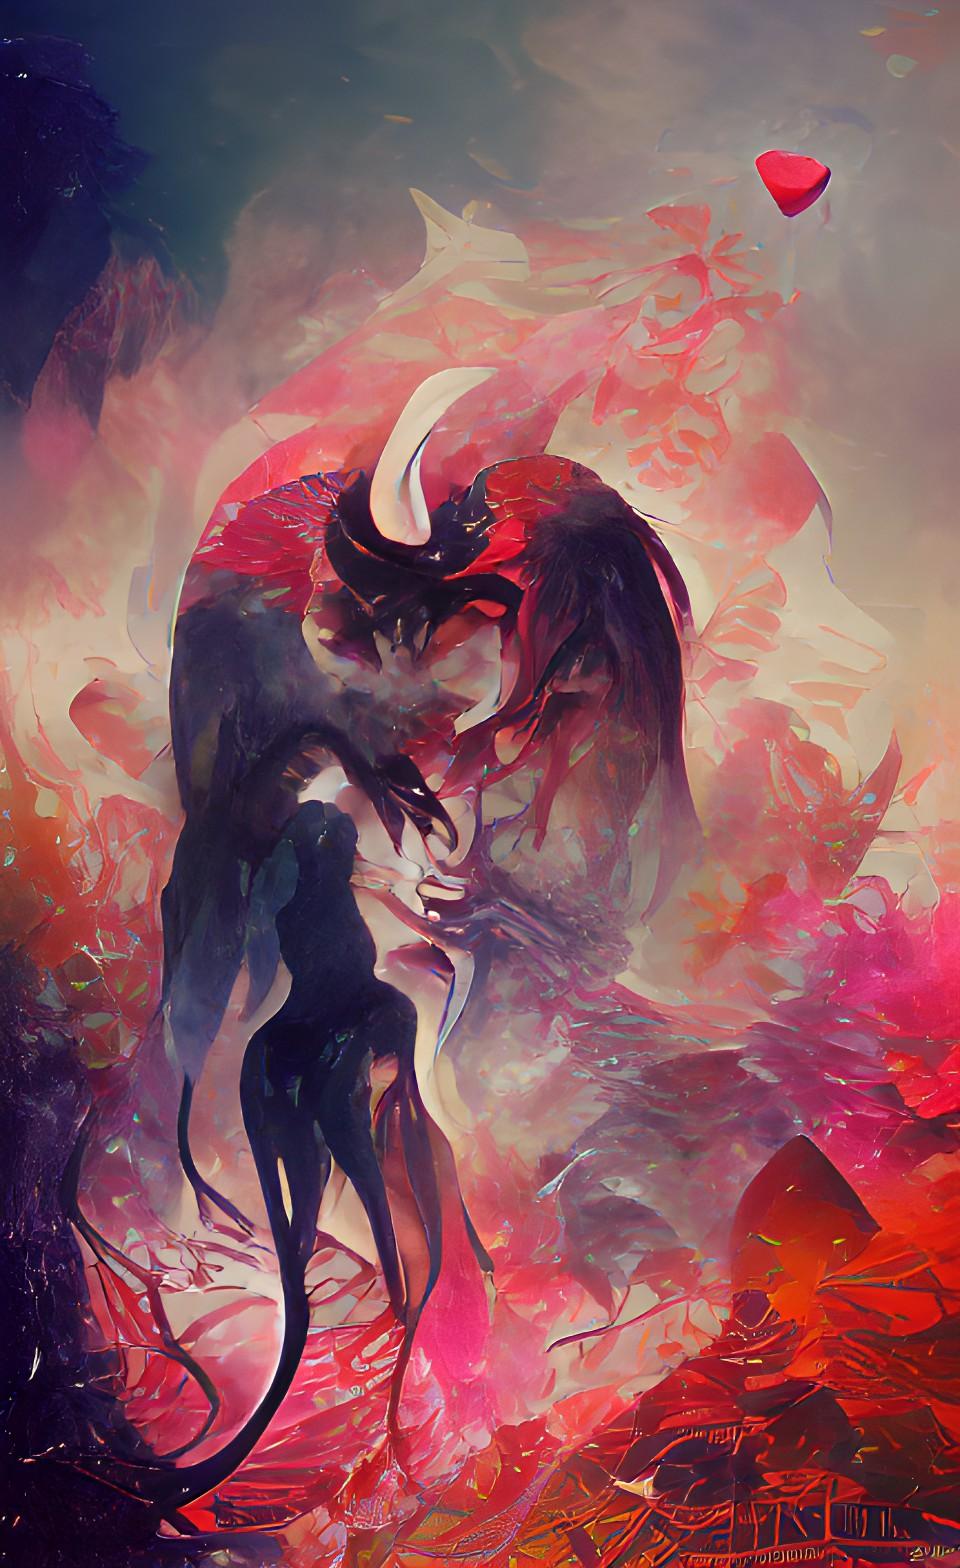 Can a Demon Fall in Love? by MSprinkleZ on DeviantArt